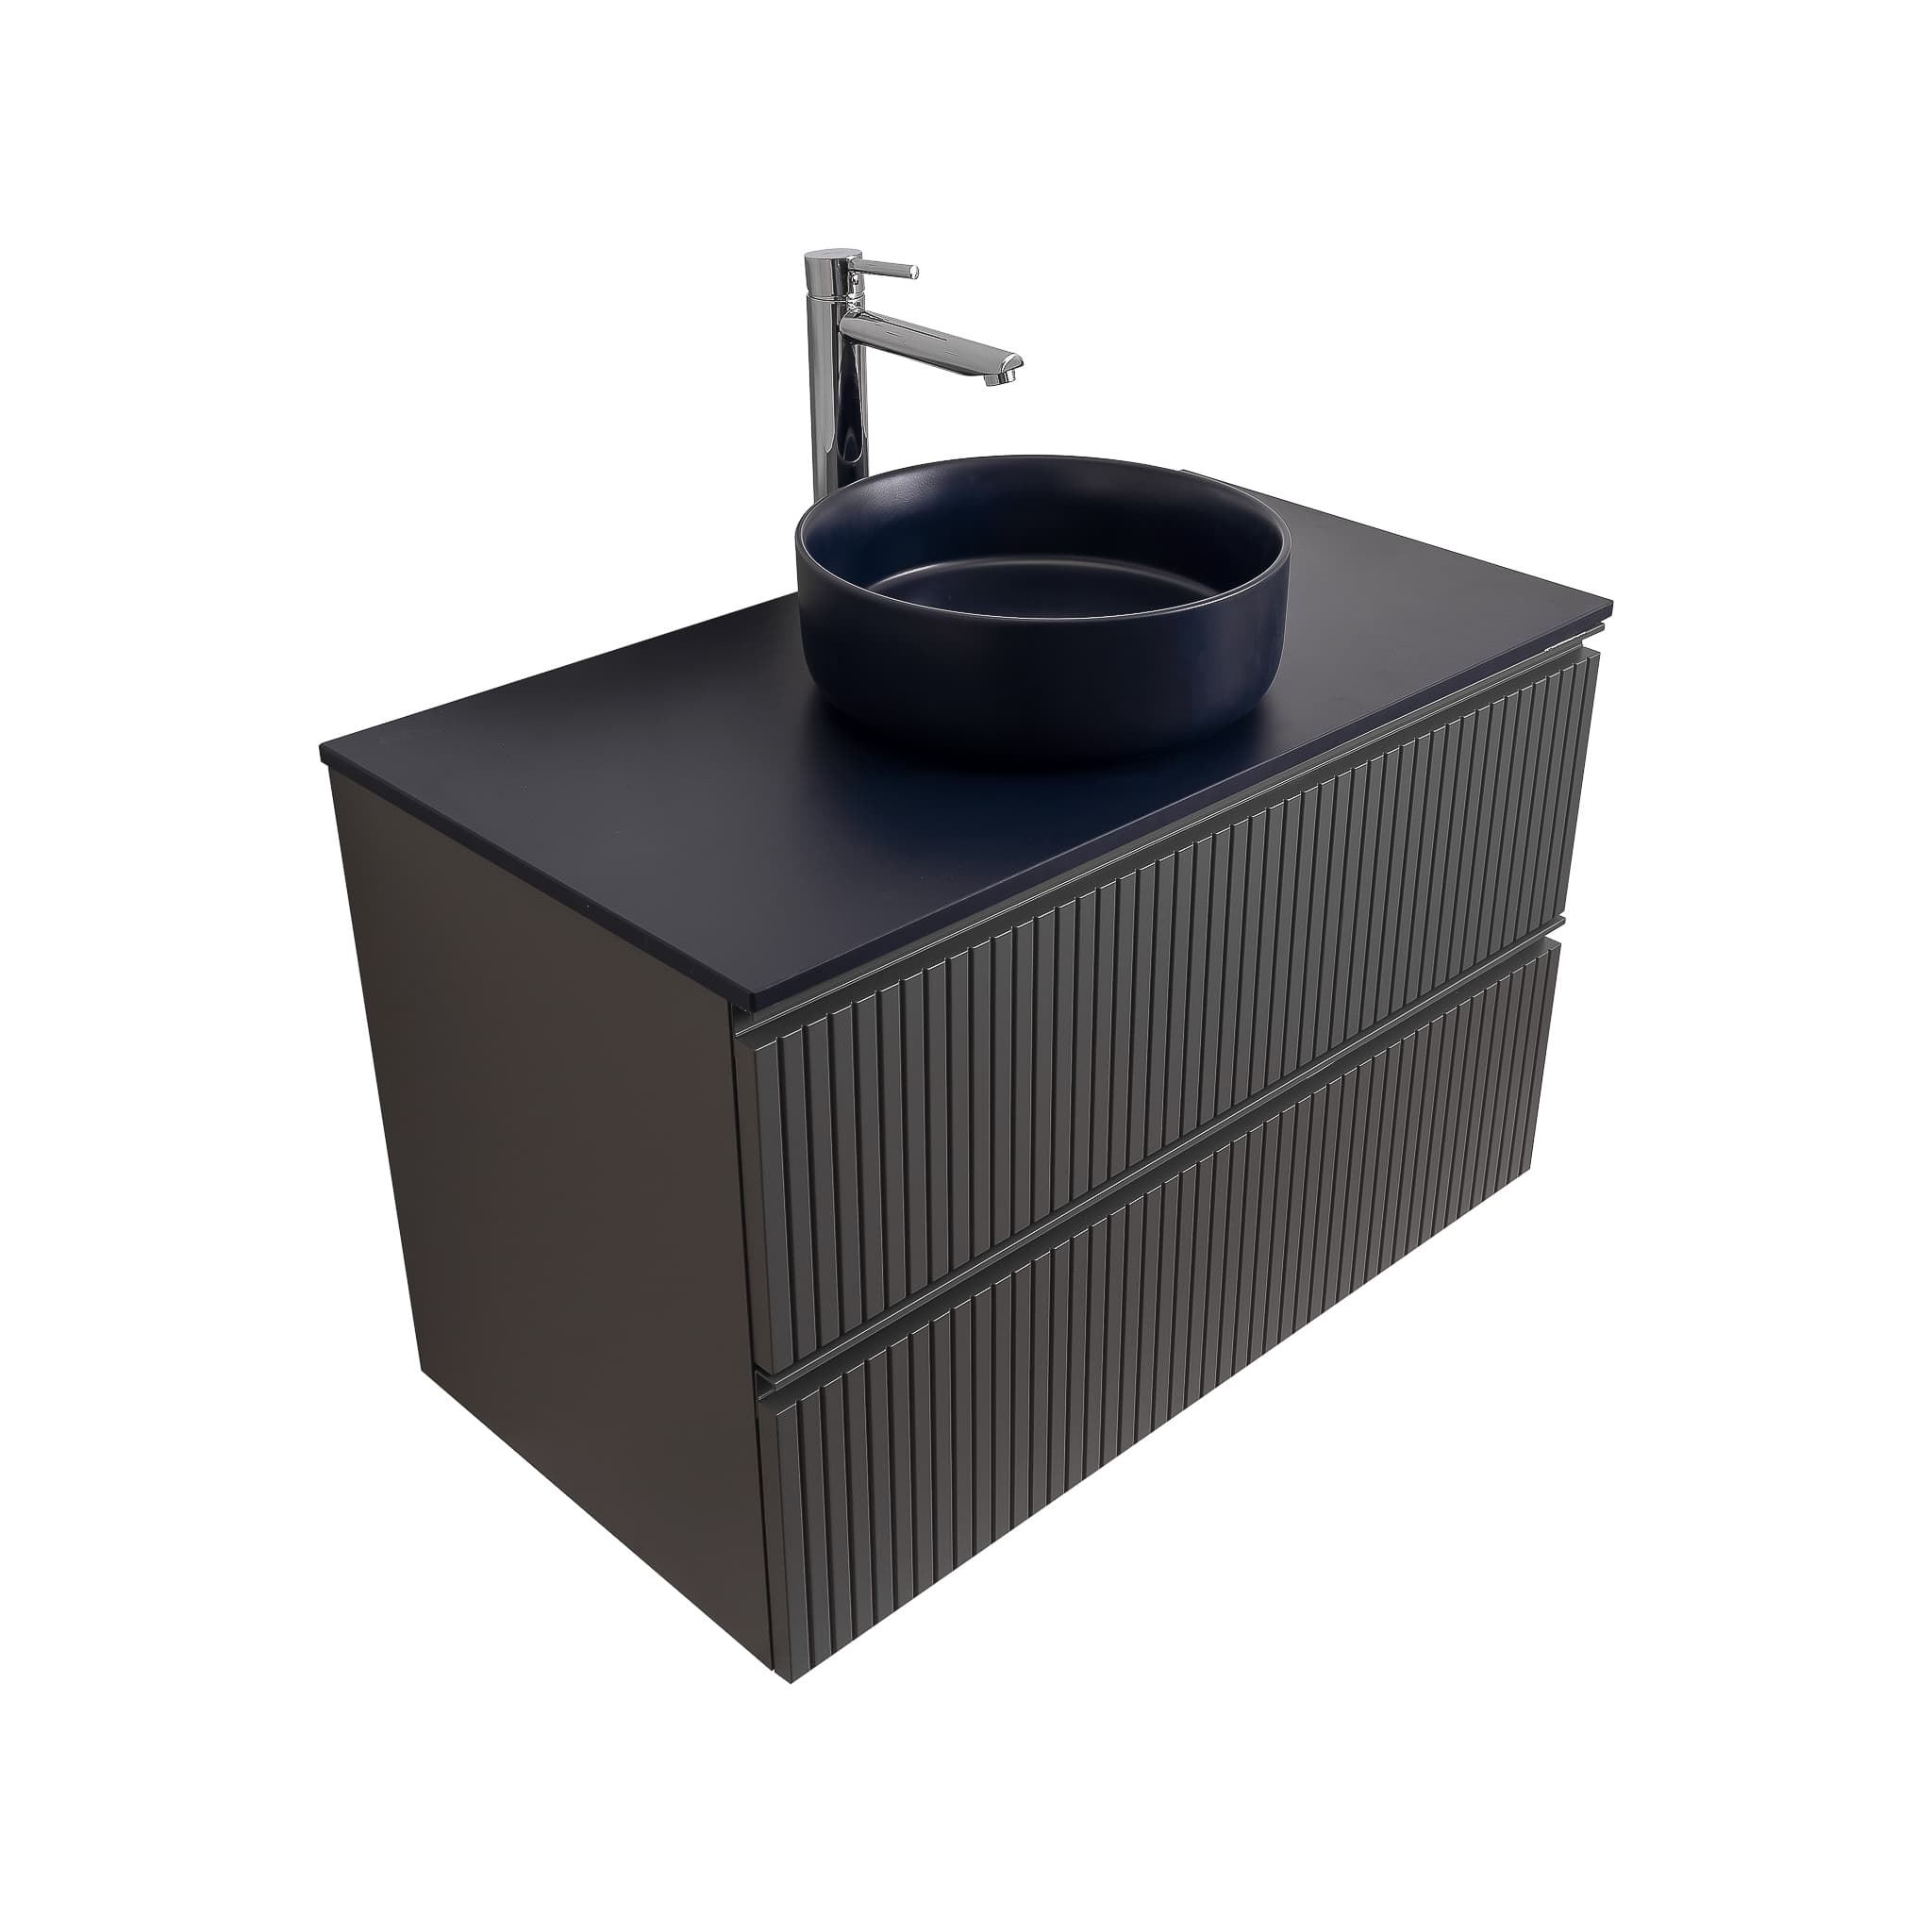 Ares 31.5 Matte Grey Cabinet, Ares Navy Blue Top And Ares Navy Blue Ceramic Basin, Wall Mounted Modern Vanity Set